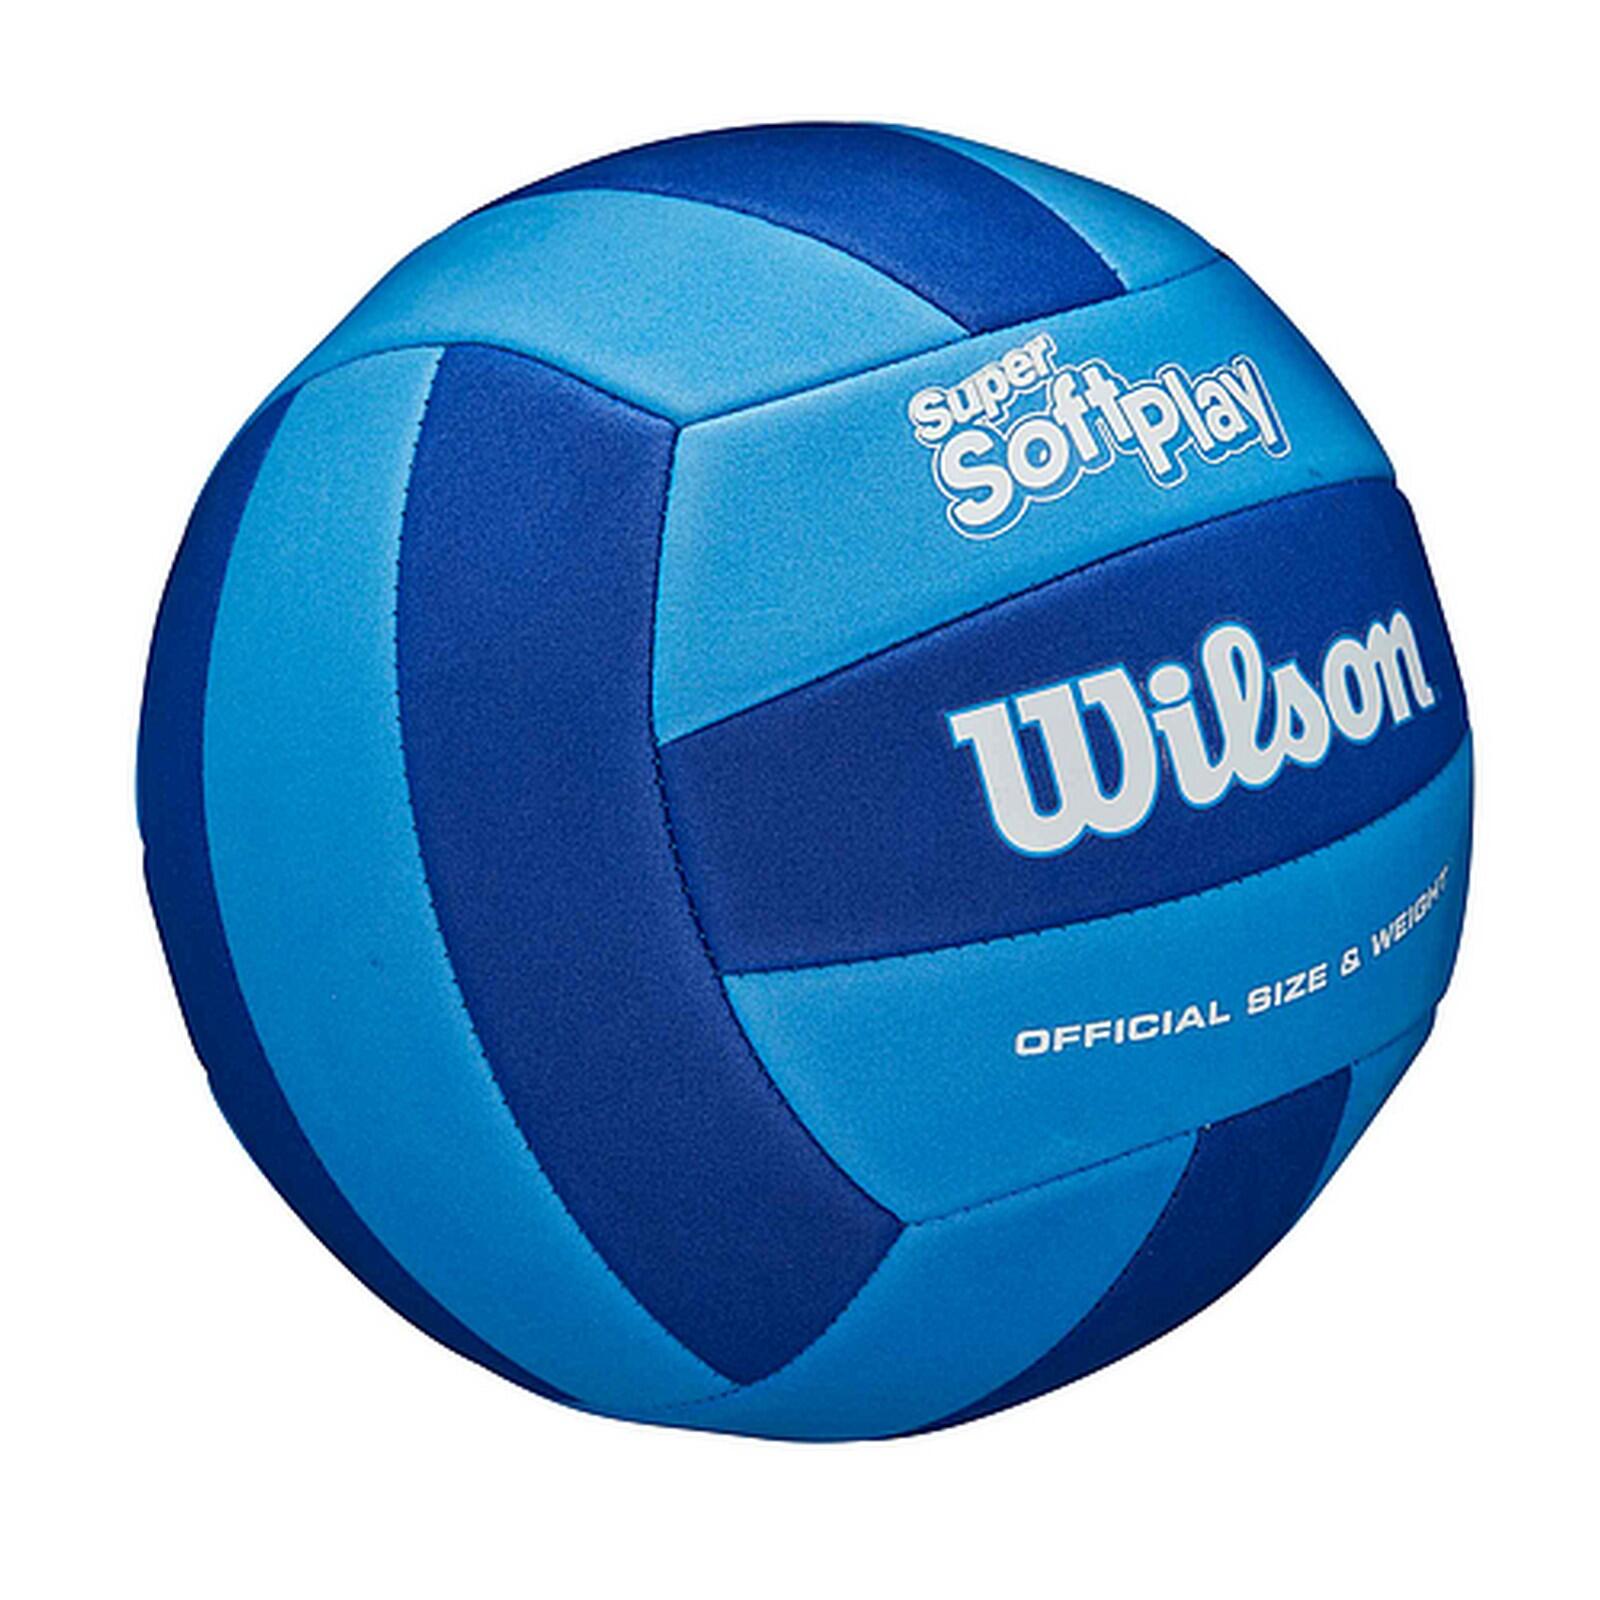 Soft Volleyball (Royal Blue/Navy) 2/4